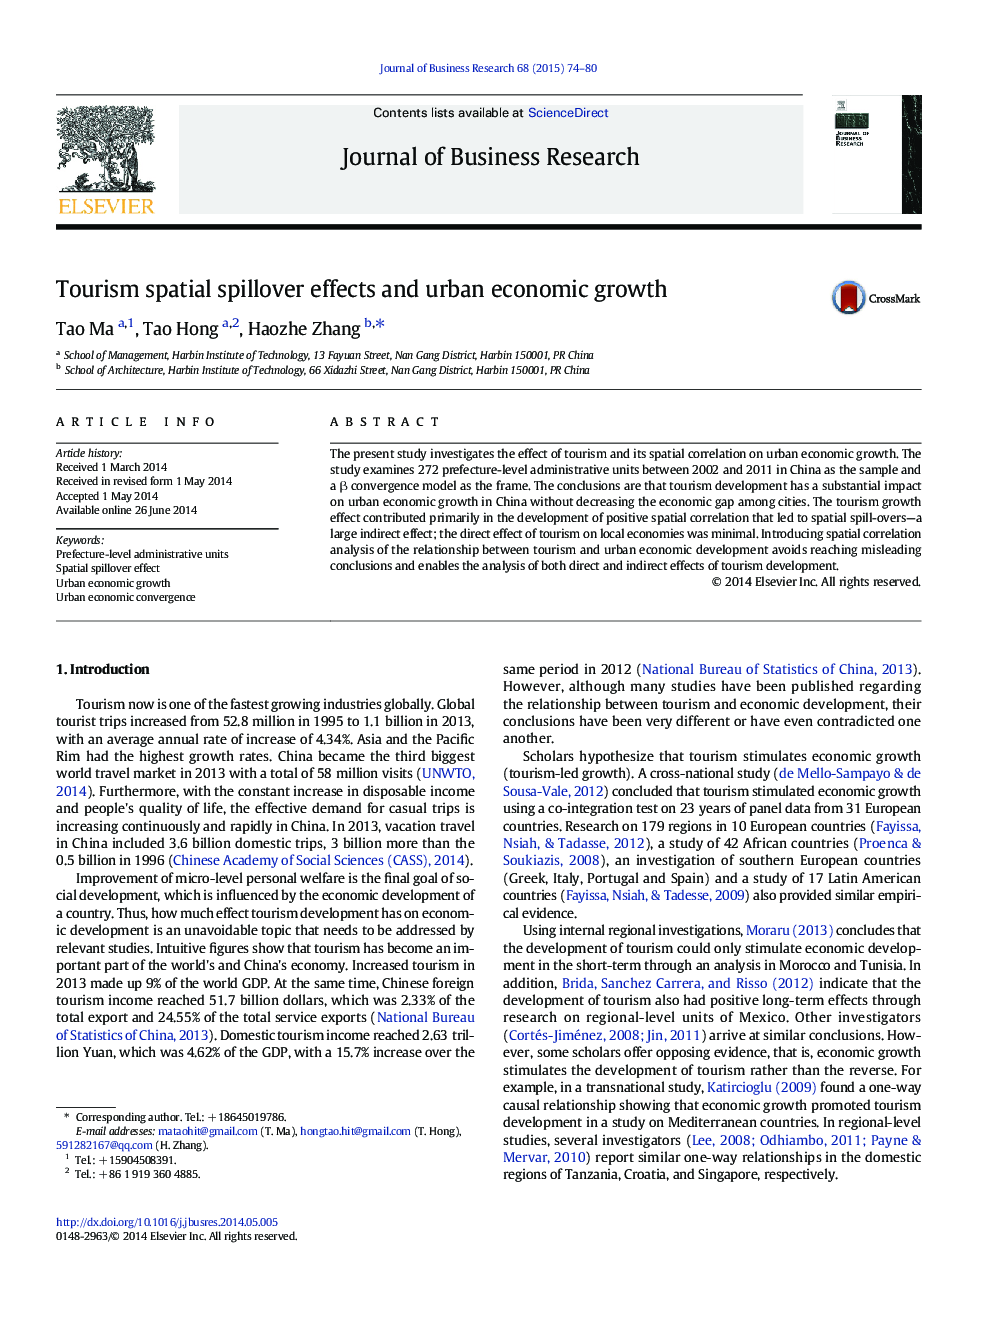 Tourism spatial spillover effects and urban economic growth